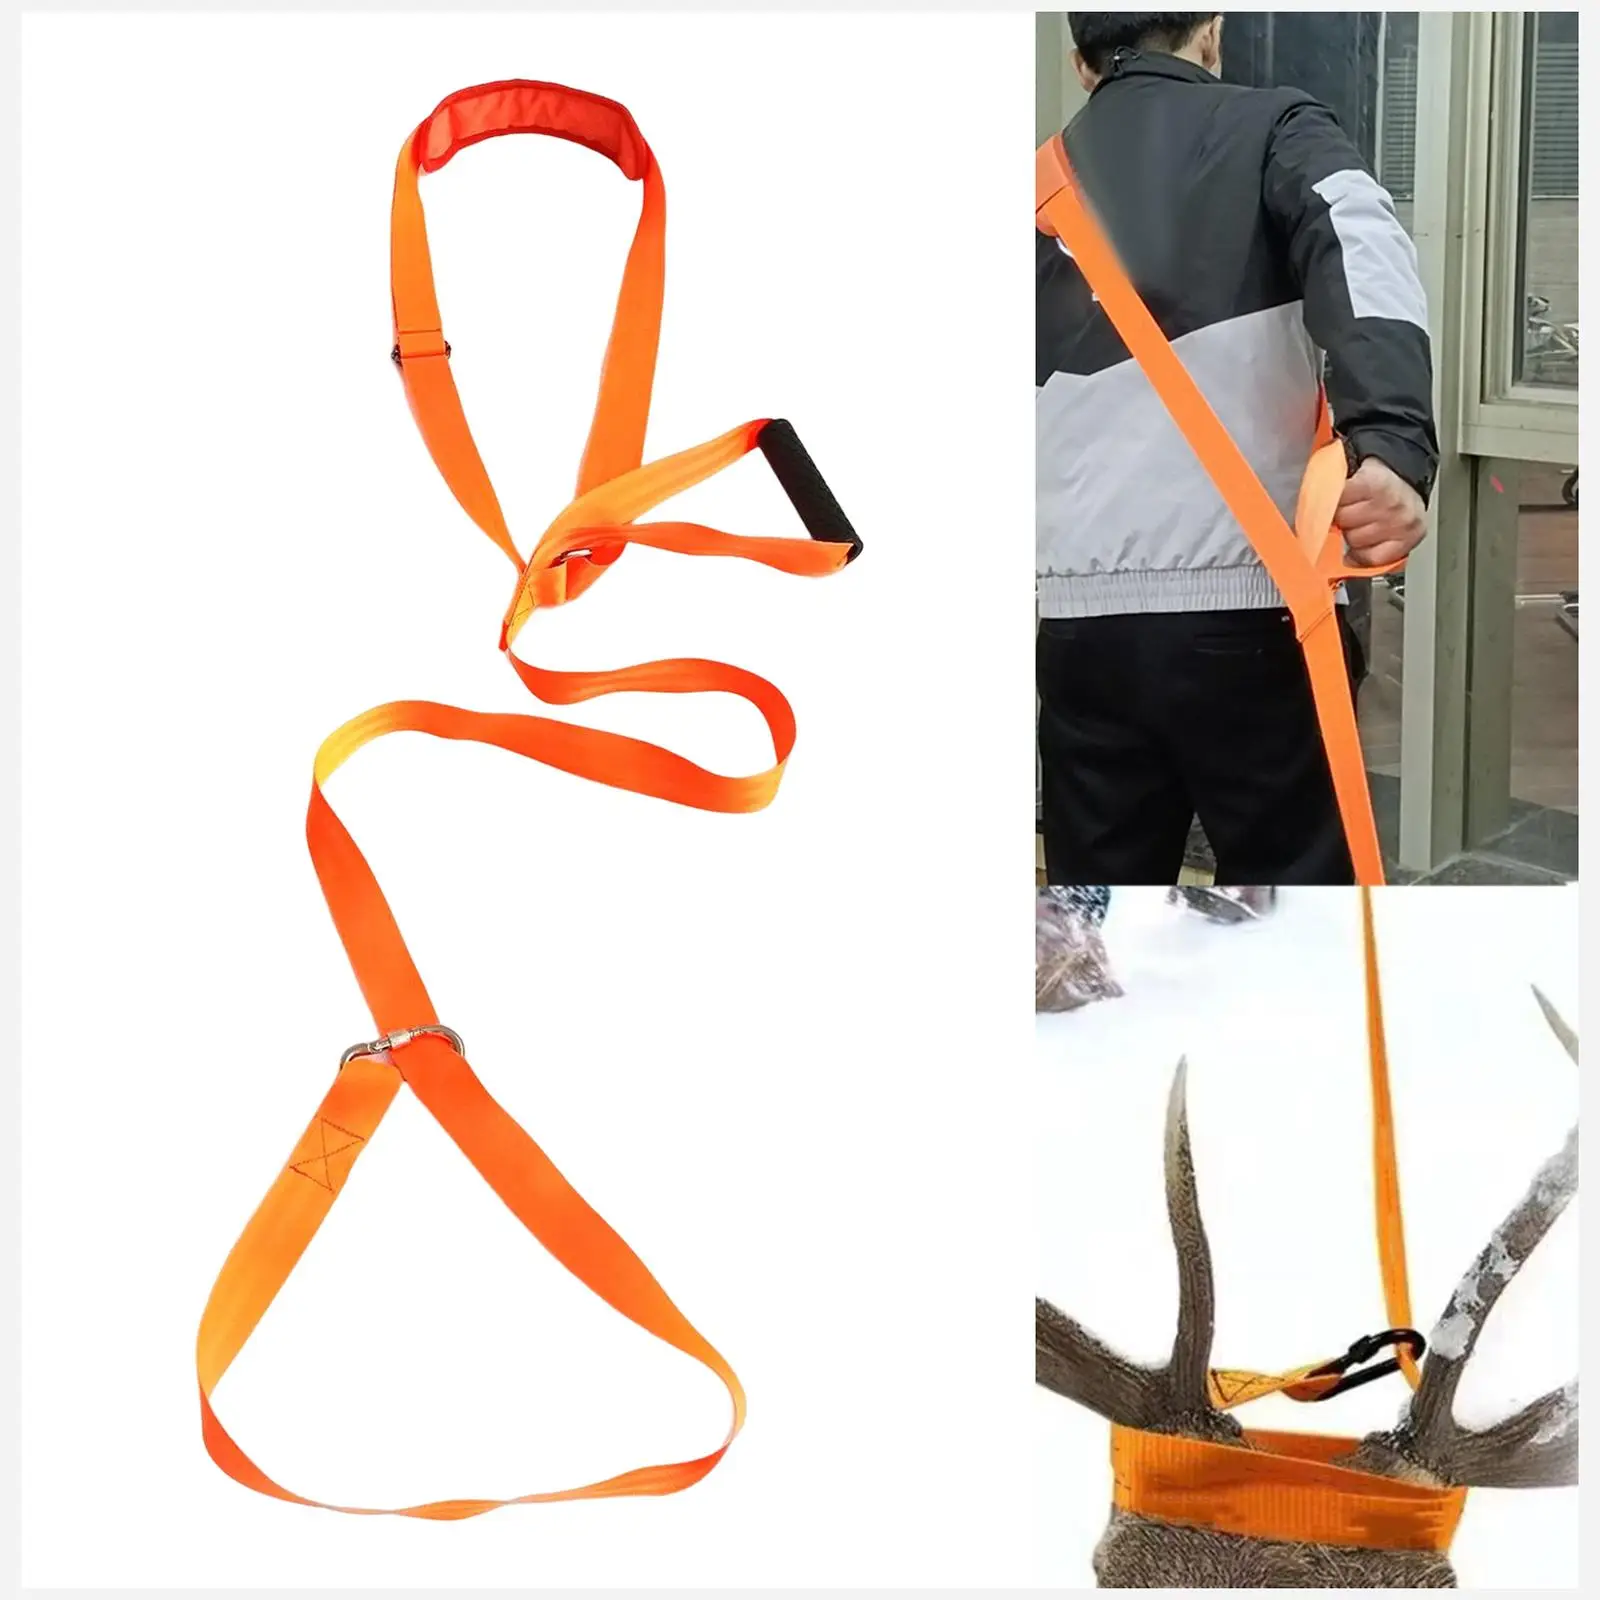 Deer Drag and Harness with Comfortable Handle Easy to Use Hunting Gear Durable Band Deer Drag Rope for Farm Men Women